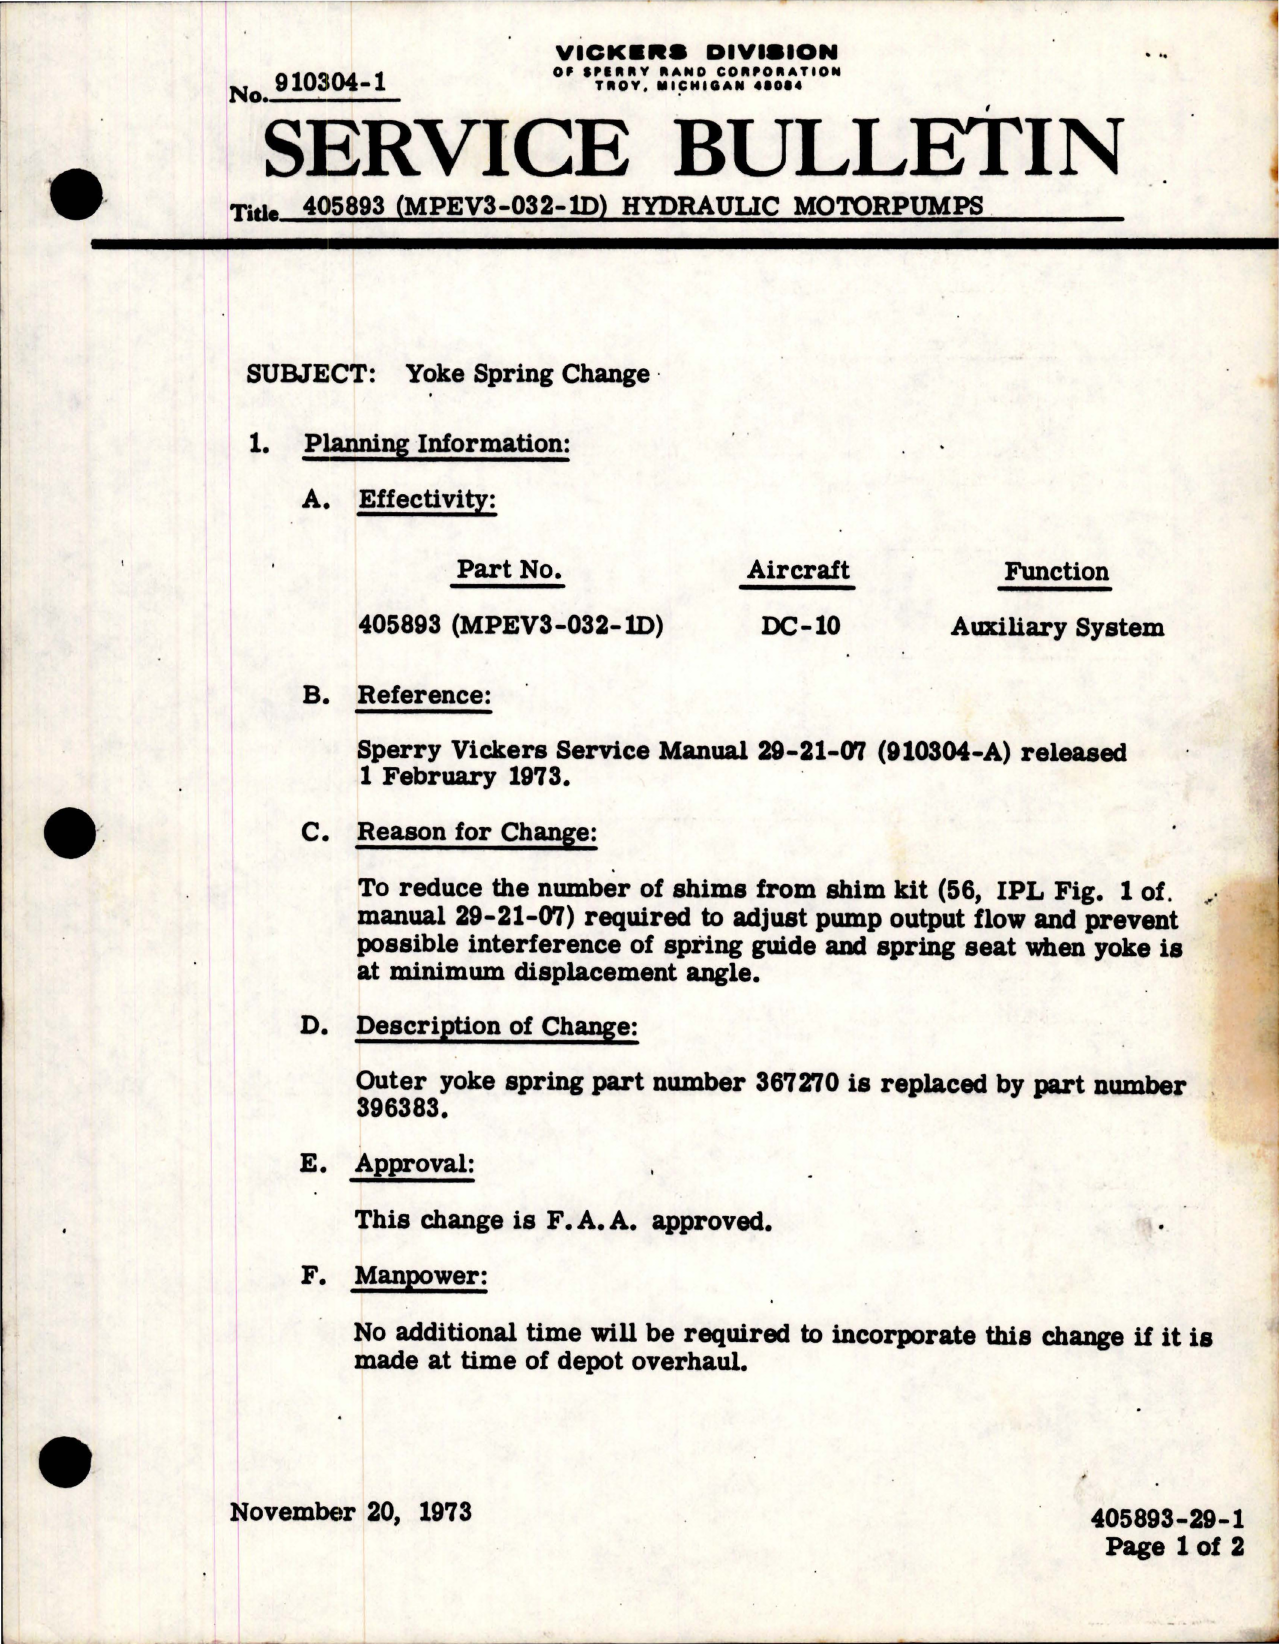 Sample page 1 from AirCorps Library document: Hydraulic Motorpump - Yoke Spring Change - Part 405893 - Model MPEV3-32-1D